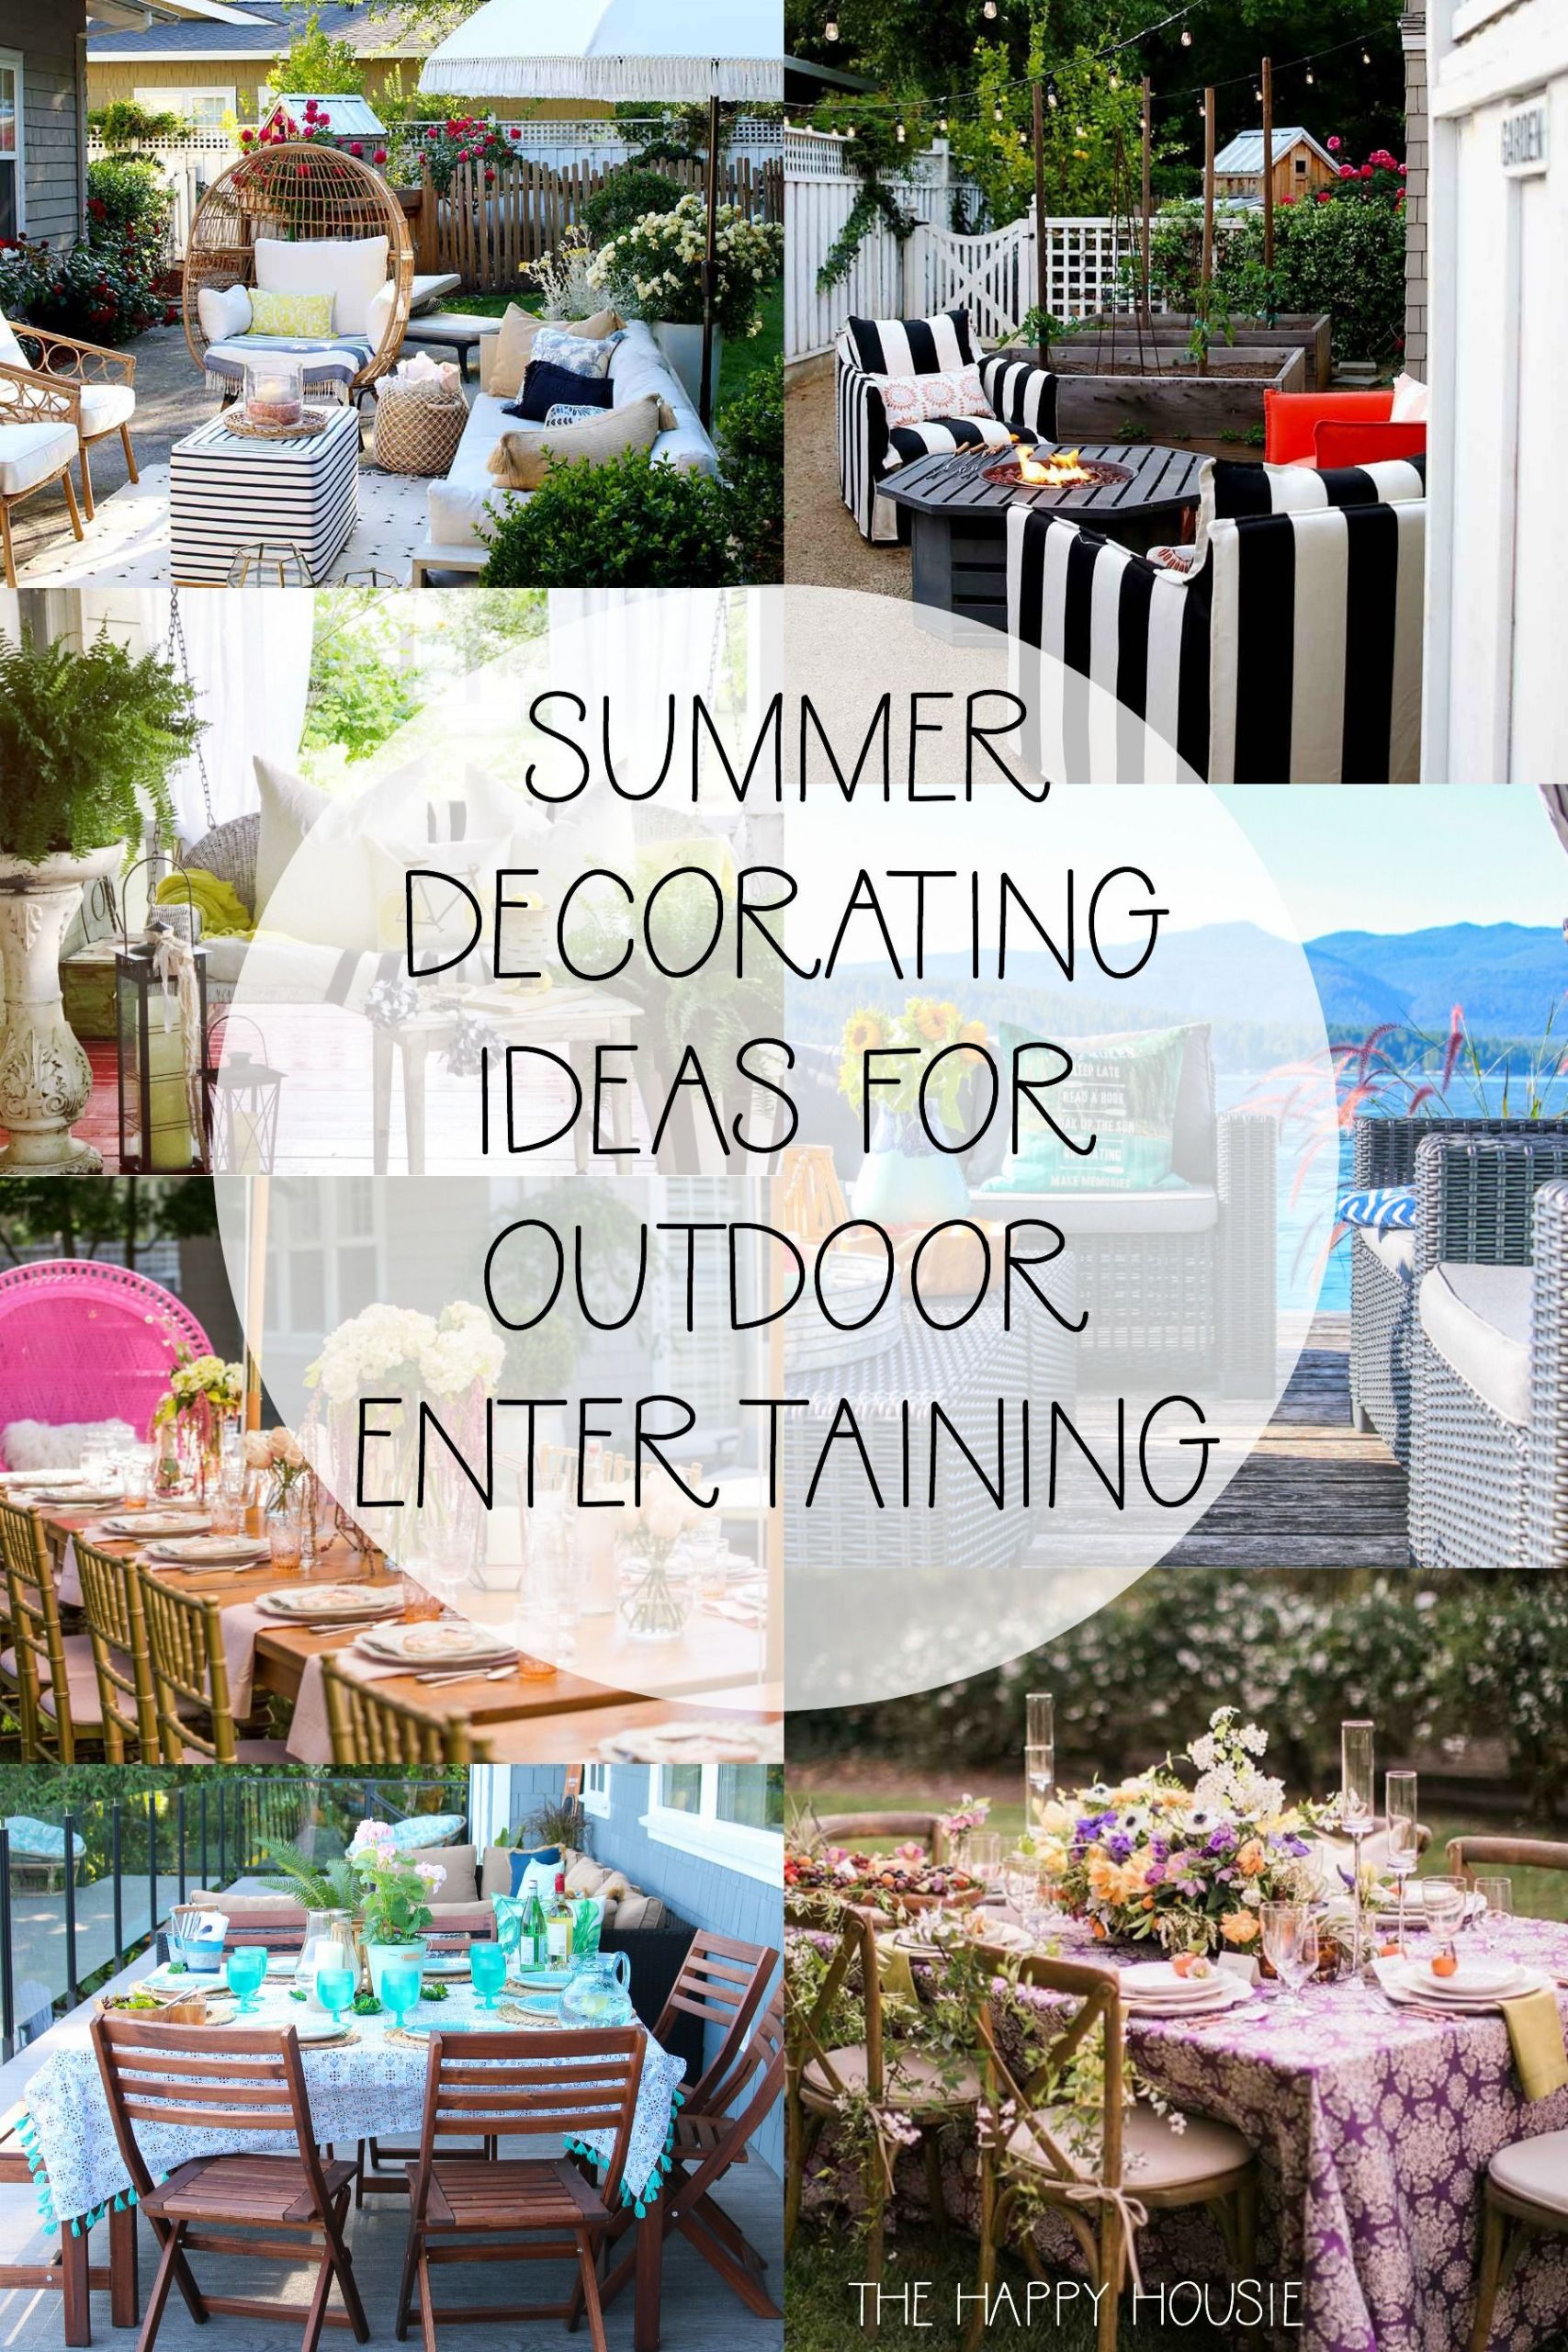 Summer Outdoor Party Ideas
 Summer Decorating Ideas for Outdoor Entertaining